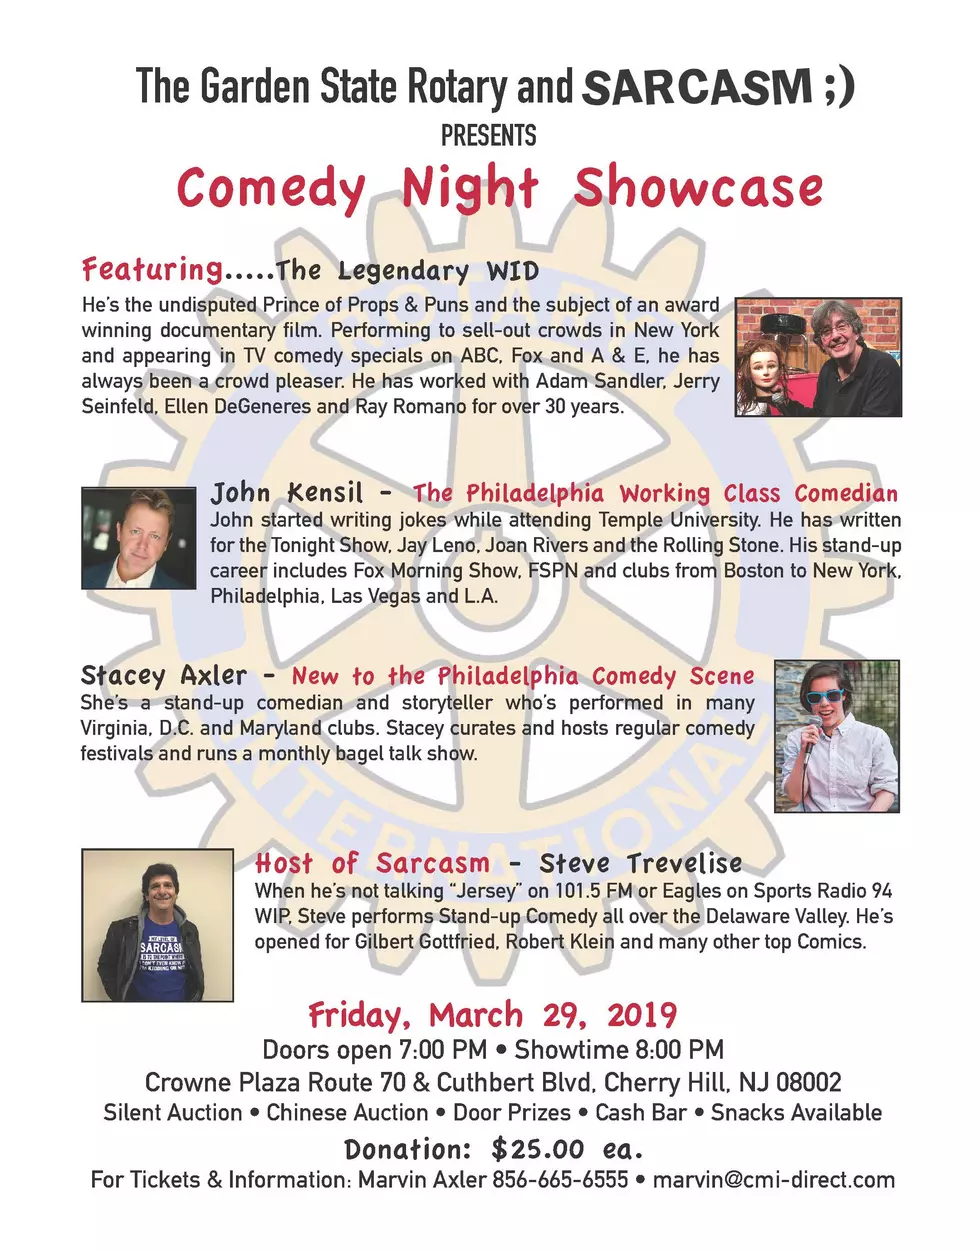 Comedy benefit this Saturday for Garden State Rotary Club